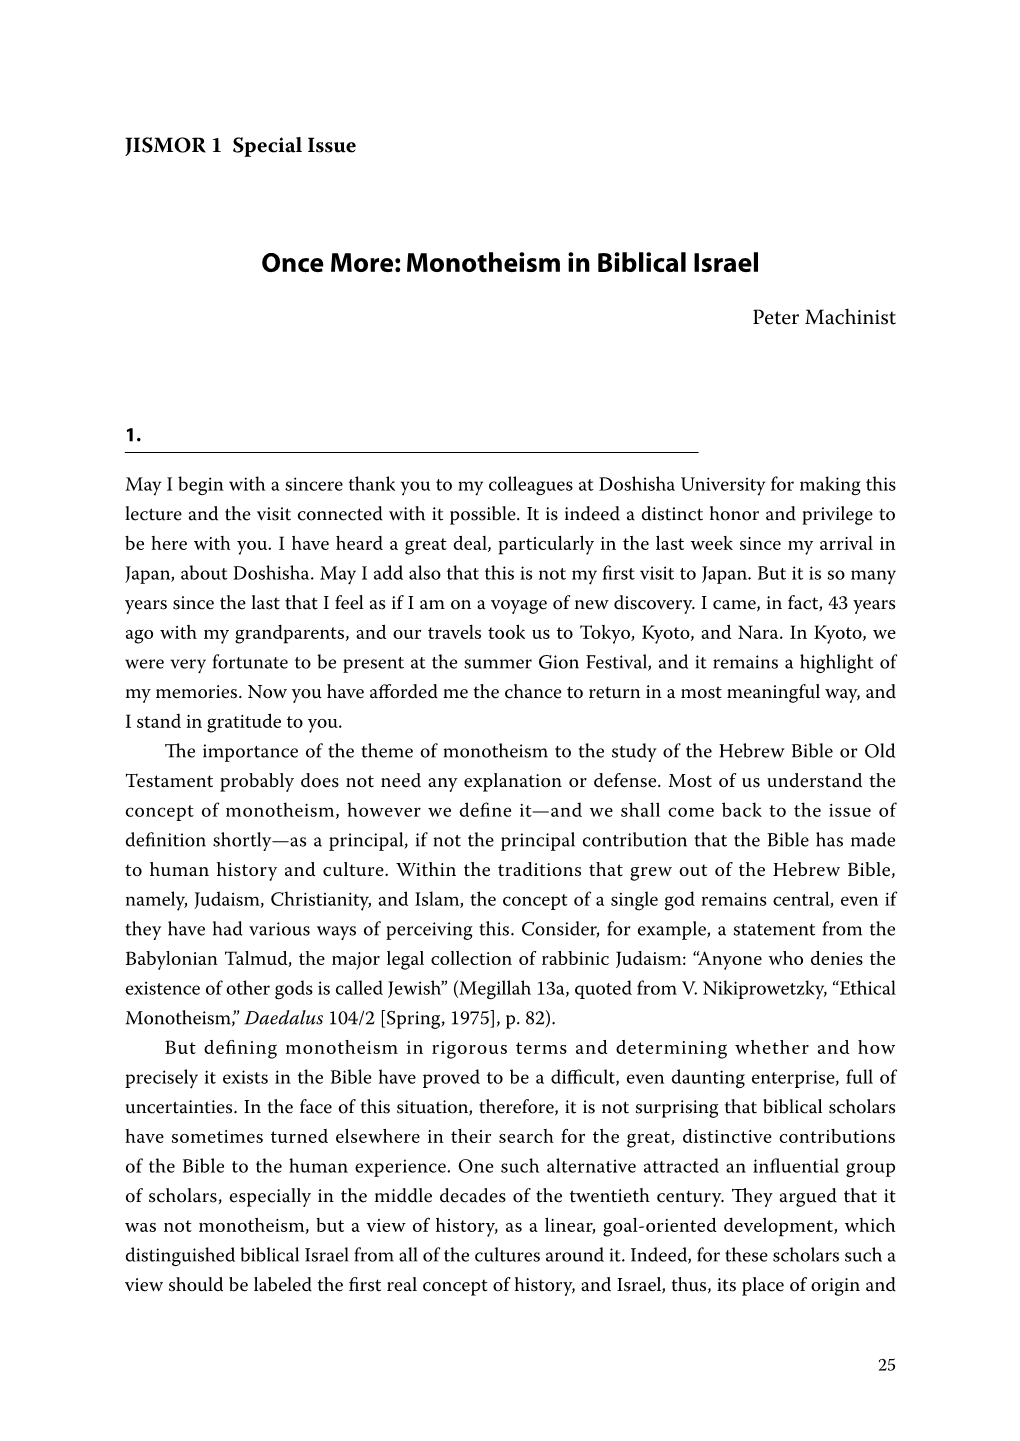 One More Monotheism in Biblical Israel